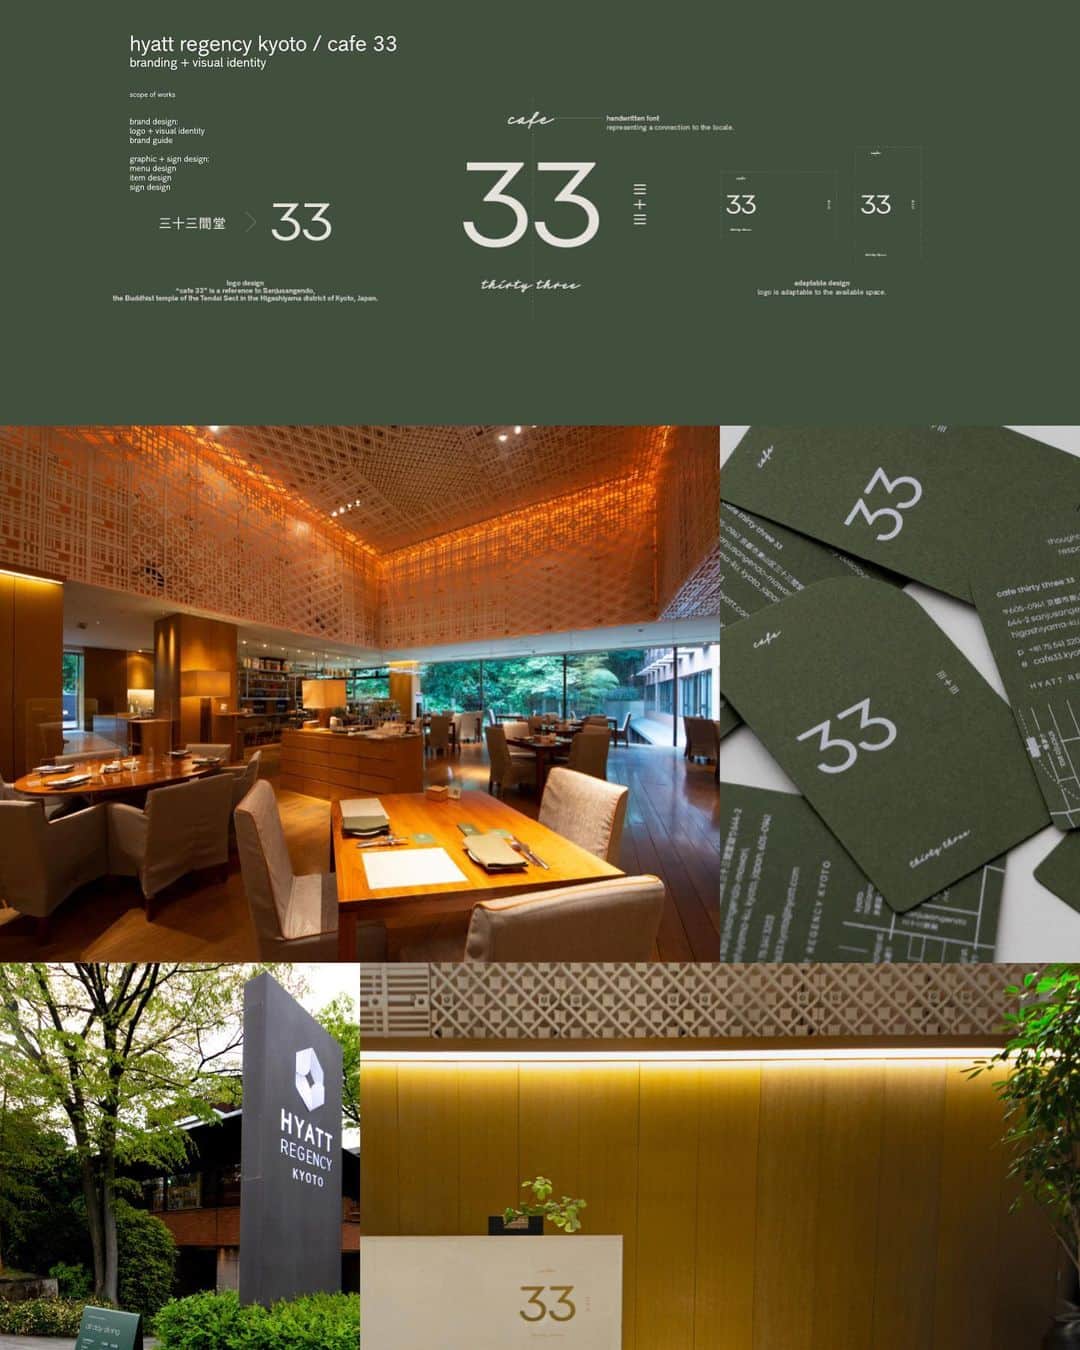 川上俊のインスタグラム：「hyatt regency kyoto / cafe 33 branding + visual identity -  scope of works : brand design: logo + visual identity brand guide graphic + sign design  - about project  “cafe 33” is a cafe-style restaurant located in Hyatt Regency Kyoto offering locally sourced farm-to-table food in the heart of Kyoto. We were responsible for the comprehensive brand design, encompassing the logo, V.I., graphic design, signage design, as well as digital and physical menu design.  “cafe 33” is a reference to Sanjusangendo, the Buddhist temple of the Tendai Sect in the Higashiyama district of Kyoto, Japan. With the Arabic numeral “33” as the focal point of the logo, we arranged script letters and kanji characters to express the warmth of the homestyle foods and Japanese traditions and handicrafts.  For the brand color, green was selected to evoke the lush greenery of the Japanese garden directly viewable from the restaurant. The menus, stationary, and outdoor signage all utilize the same garden green, greeting the guests with a natural and warm welcome to the restaurant. In addition, brass was used for signage and other items to complement the interior design by NAO Taniyama & Associates.  As a project that began amid the global pandemic, we had the unique challenge of adapting the design to respond to the requirements of the times, building a brand design that balances timelessness and flexibility.  -- interior design:  NAO Taniyama & Associates @nao_taniyama   branding: artless Inc. creative direction & art direction, logo design: shun kawakami @shunkawakami & kazuki kaneko graphic & signage design: thomas zimmerman project management : asami kinoshita photography: yuu kawakami client: hyatt corporation」